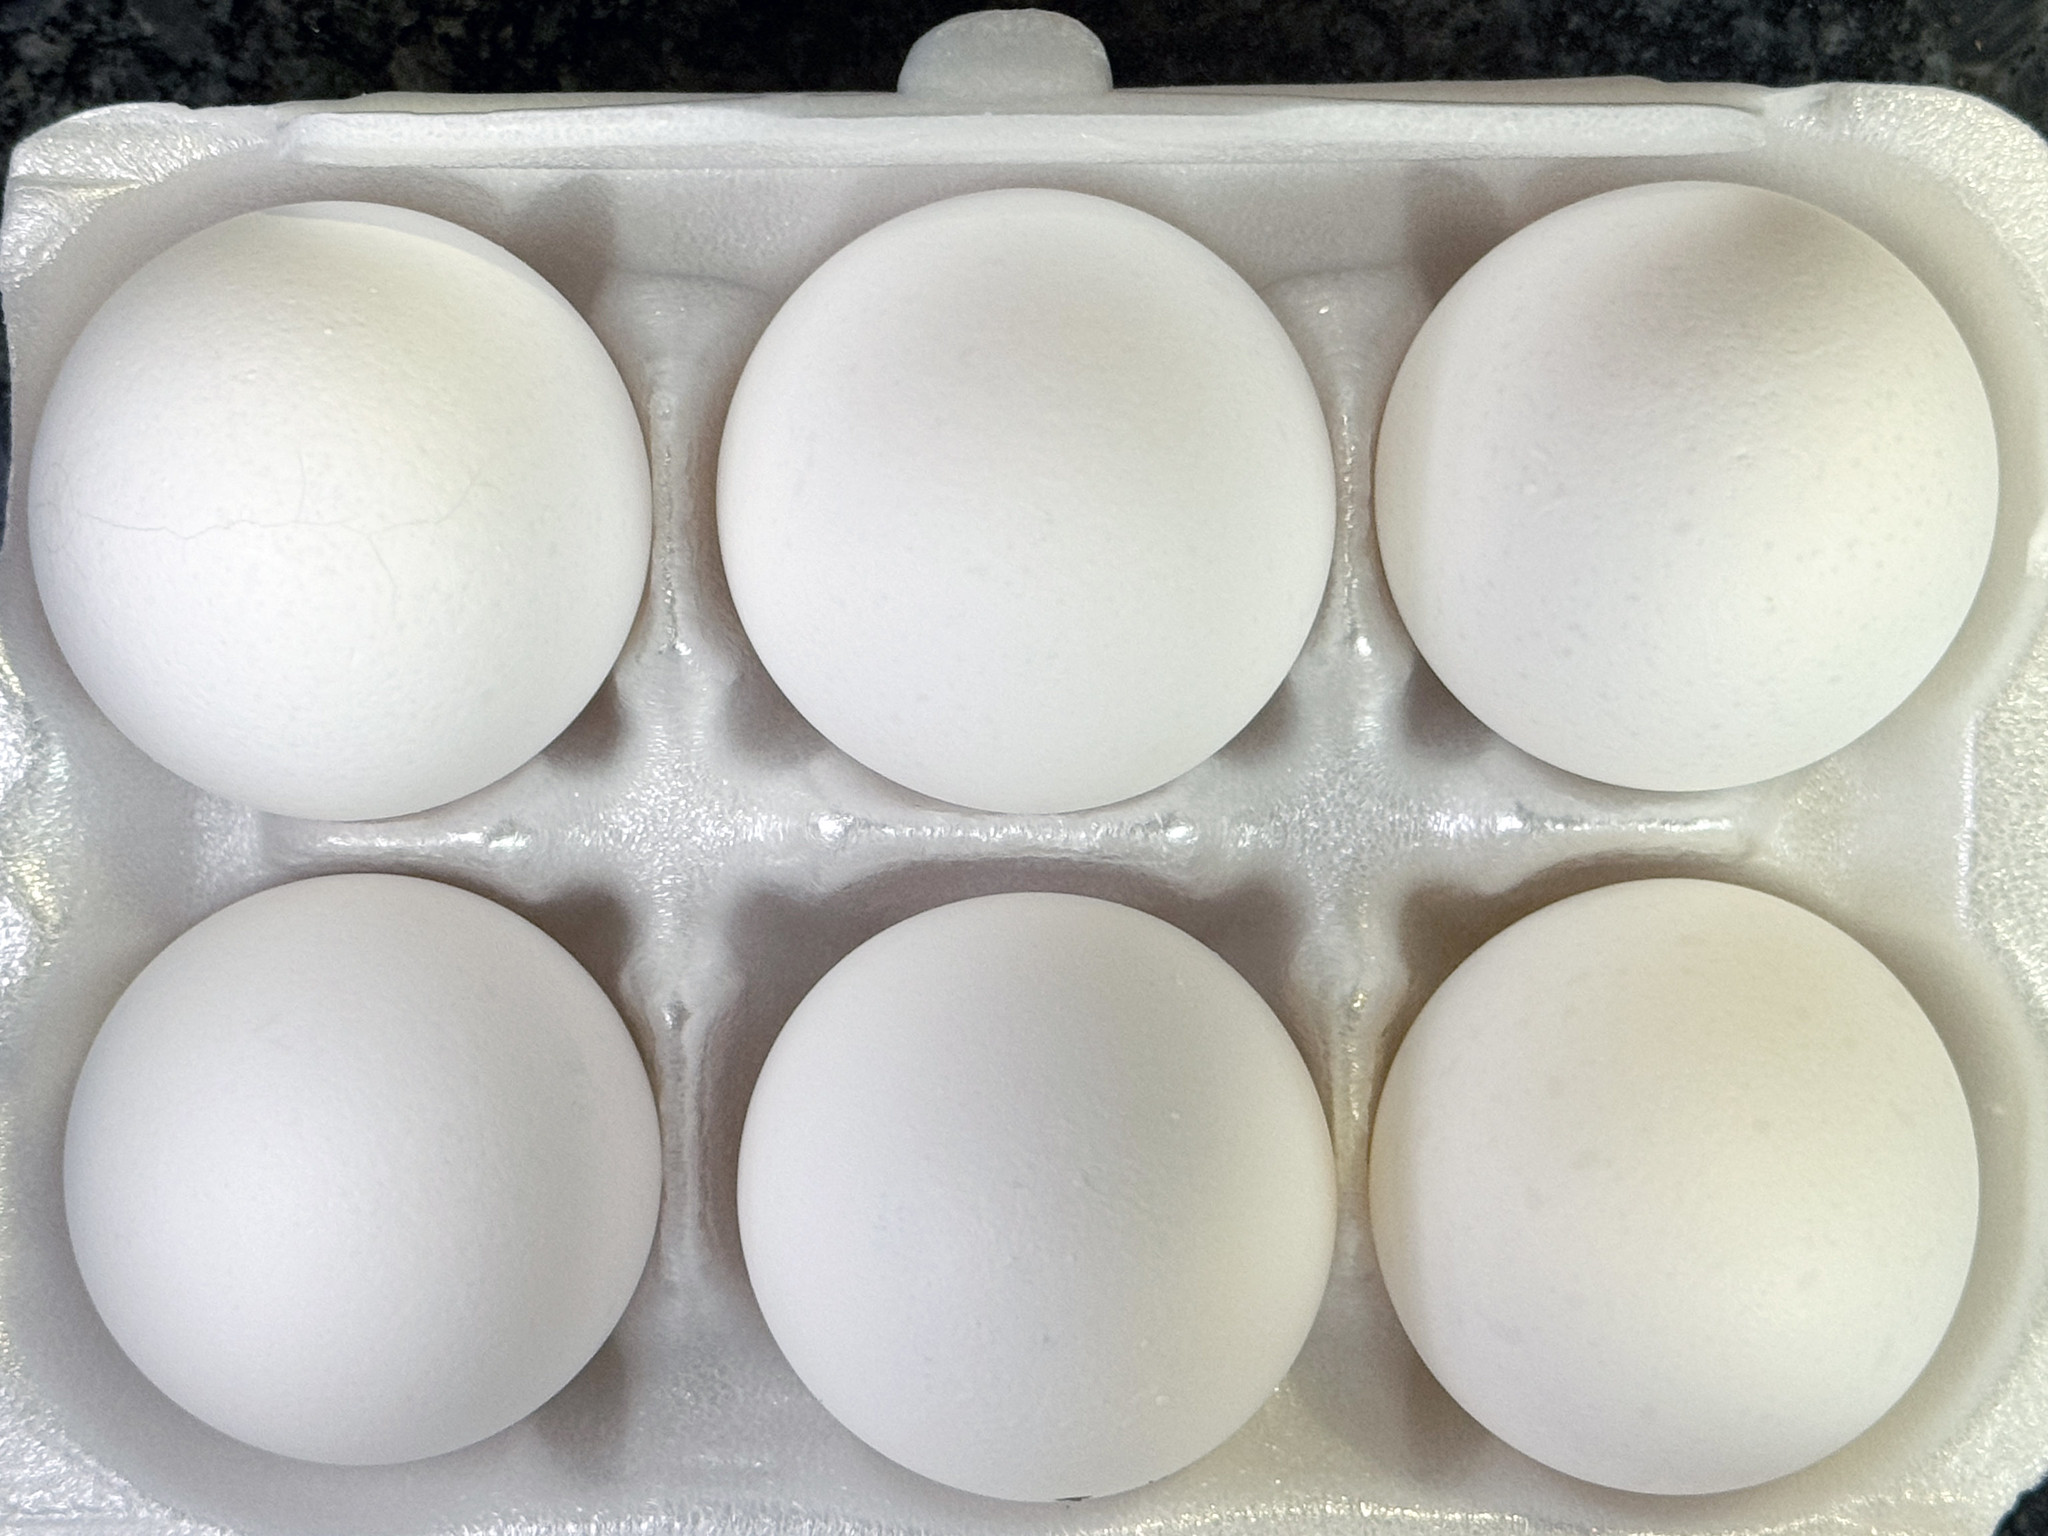 With avian influenza cases rising again, with egg prices also rise? (U of A System Division of Agriculture file photo)